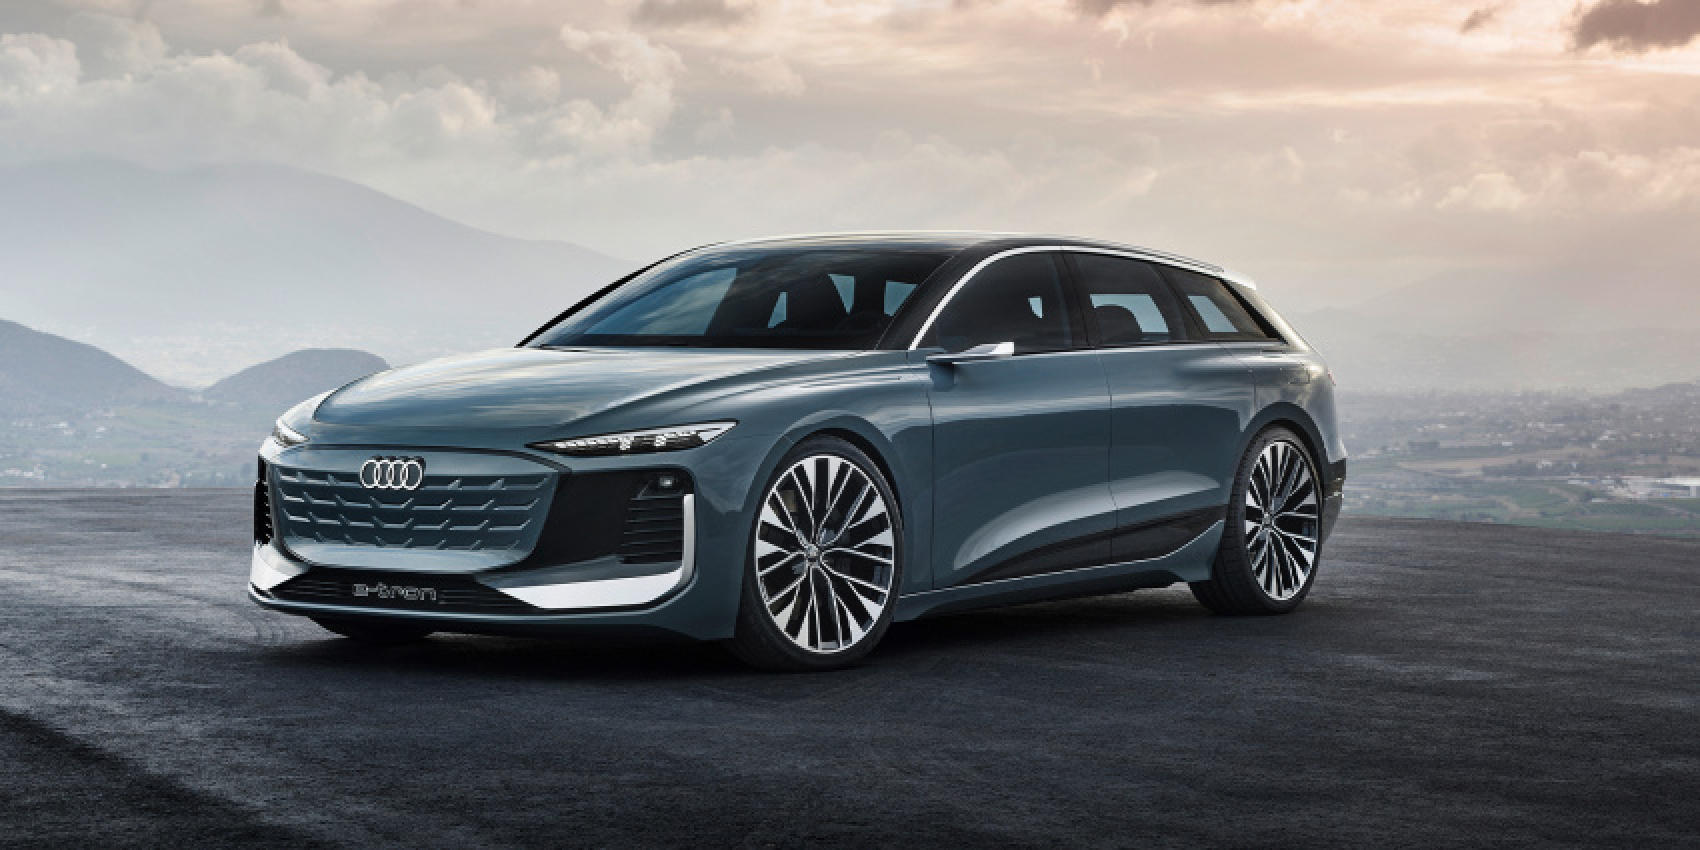 audi, autos, cars, audi unveils a6 avant e-tron station wagon concept described as a ‘storage champ’ with headlights that project a video game